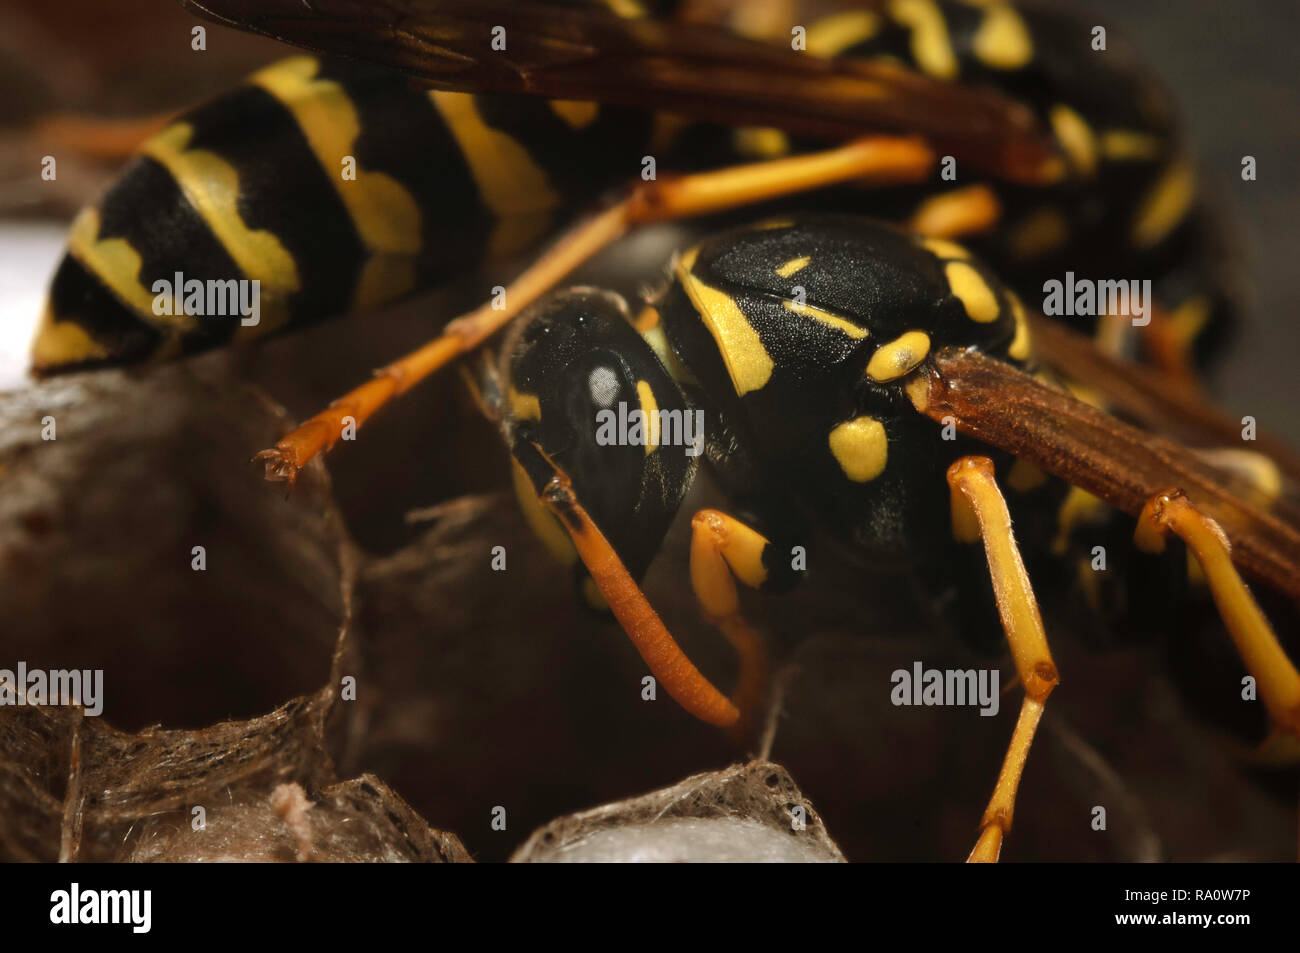 European paper wasp (Polistes dominula) guarding nest with eggs. Stock Photo